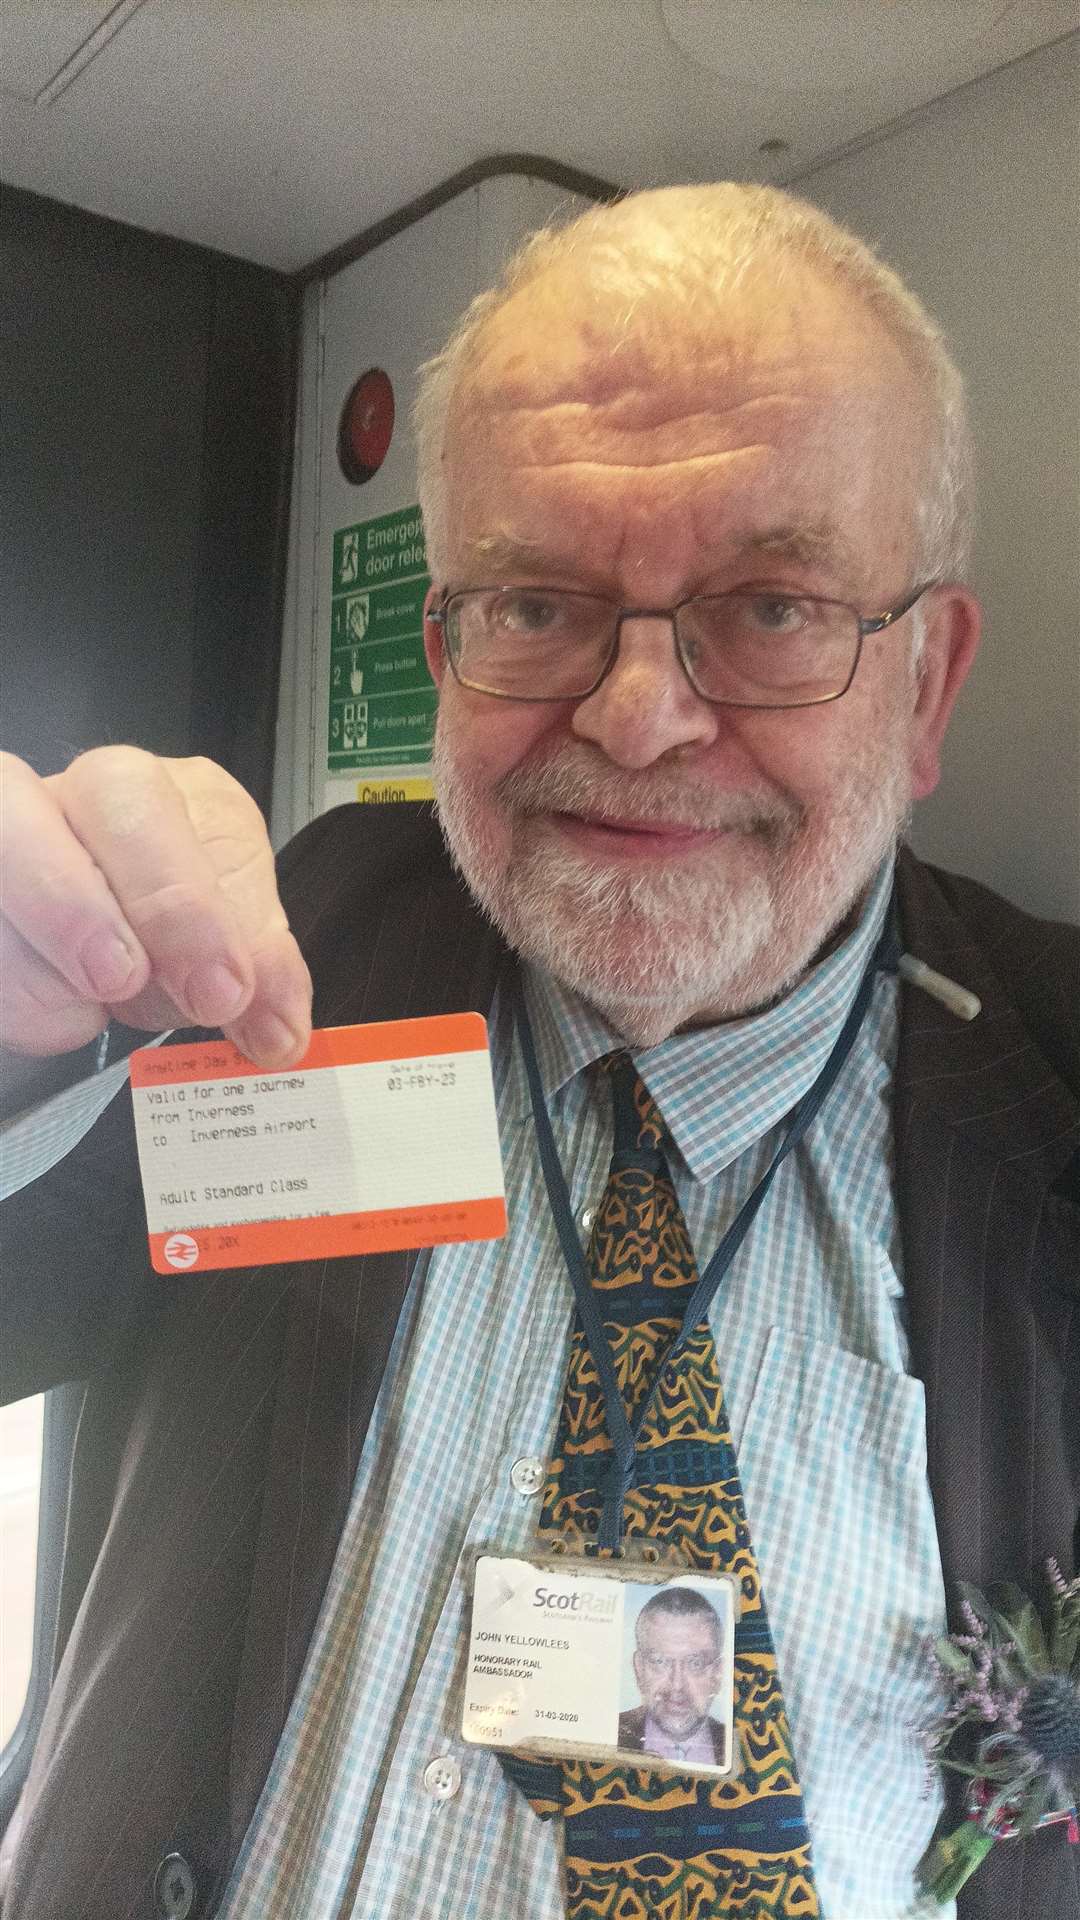 John Yellowlees with a ticket from Inverness to Inverness Airport.